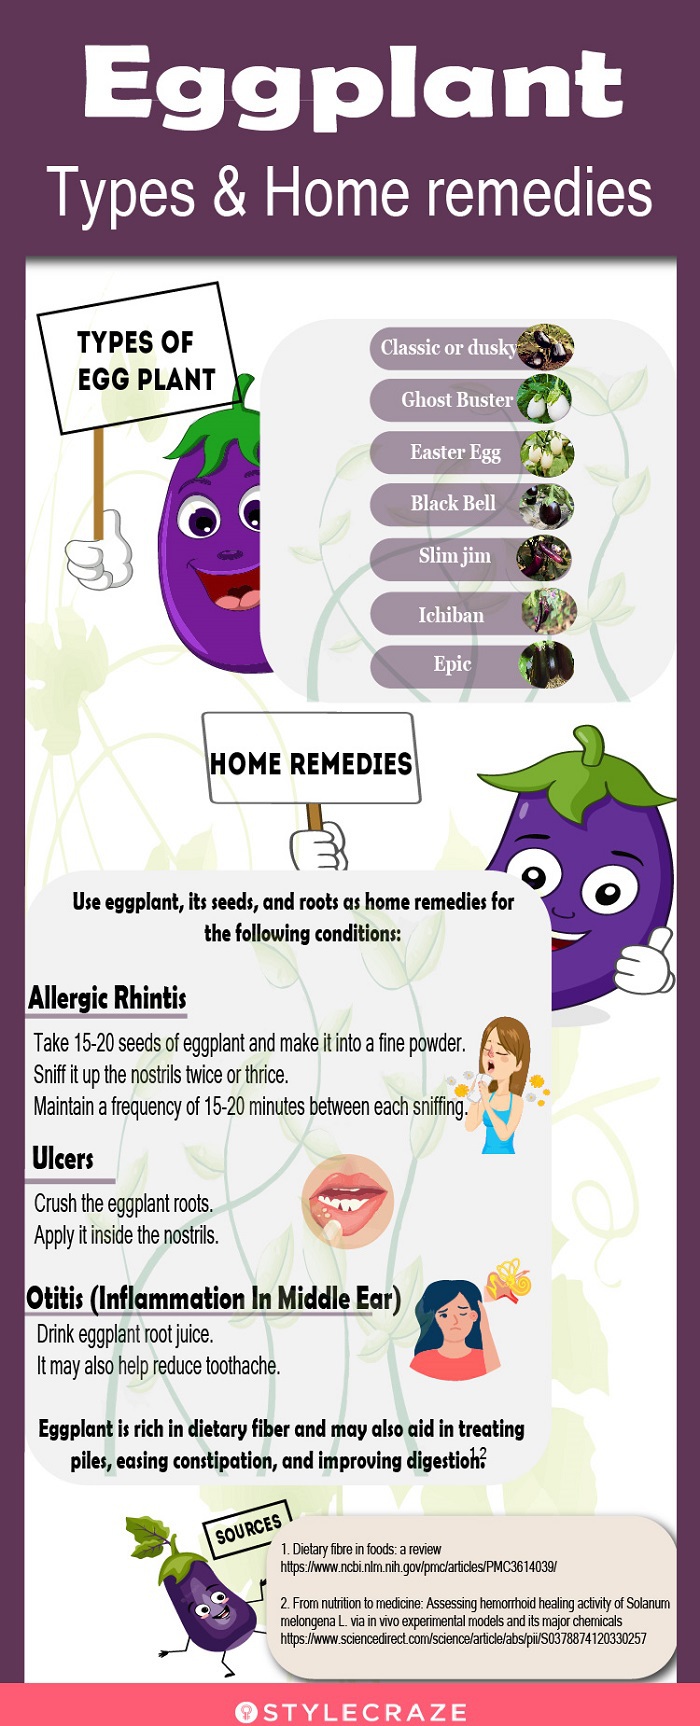 10 Benefits Of Eggplant, Nutrition Facts, And Side Effects